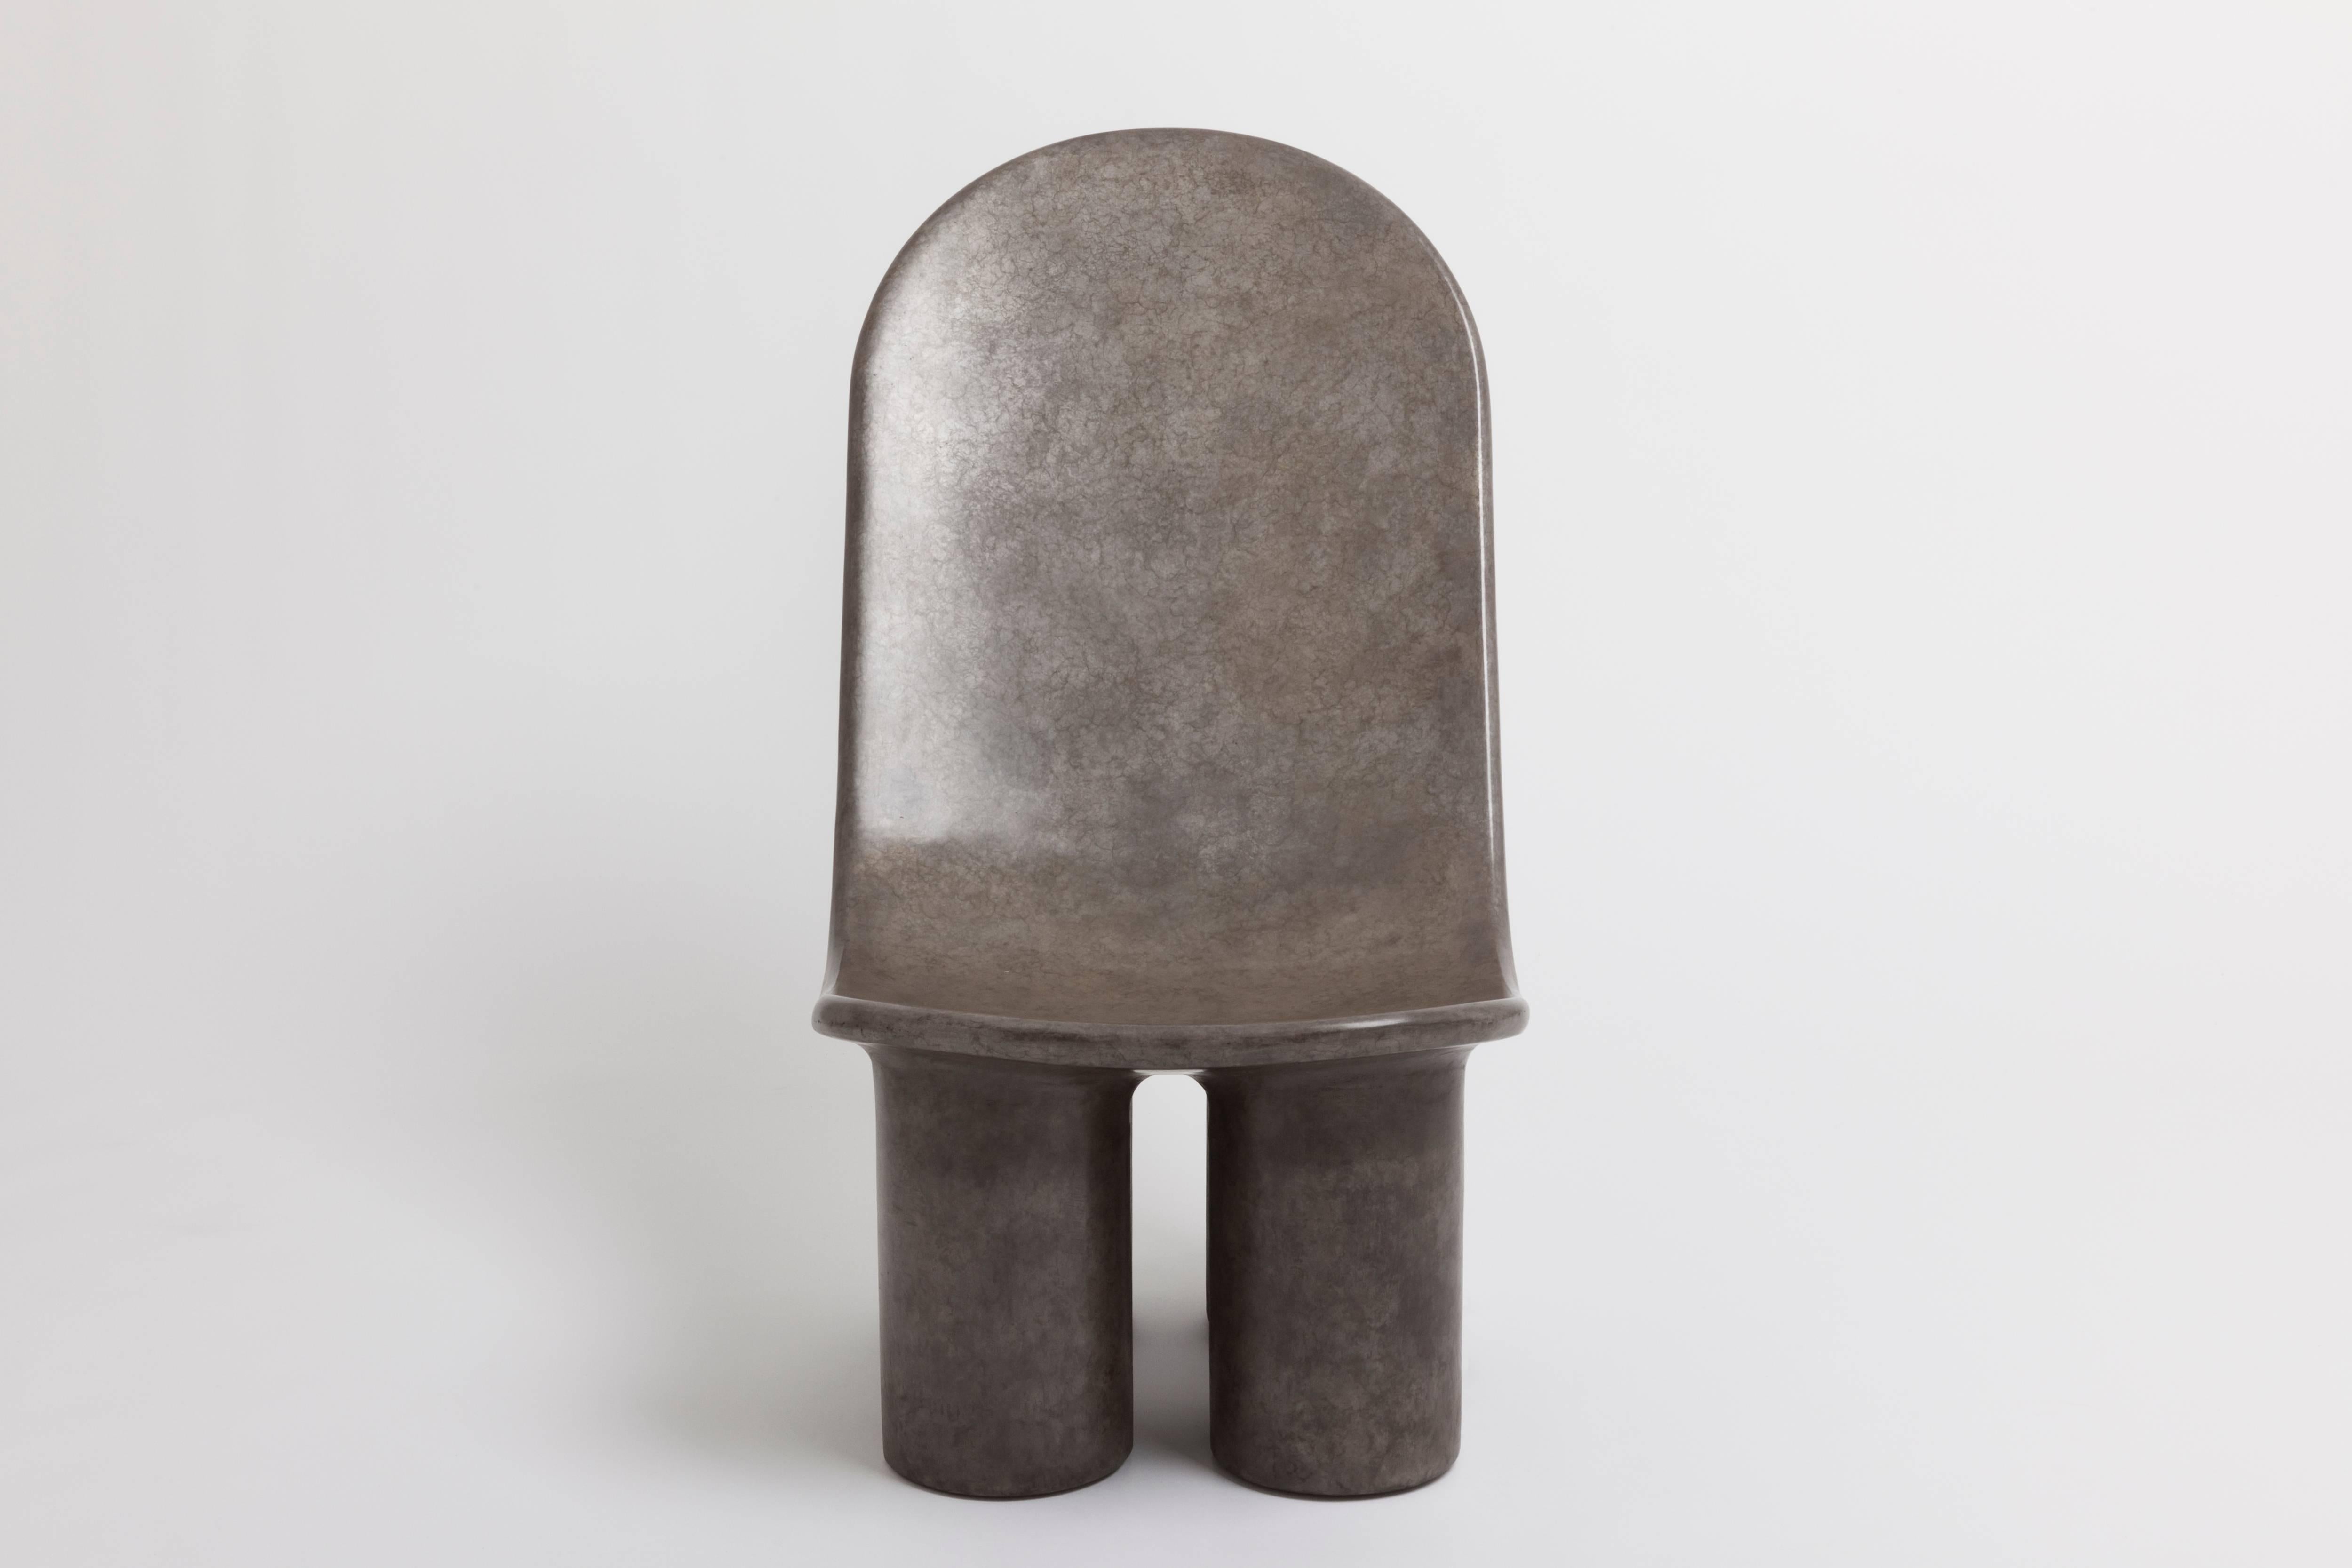 Faye Toogood [British, b. 1977]
Spoon Chair / Moon, 2016
Sand-cast bronze, silver nitrate
Measures: 39.5 x 34.25 x 22 inches
100 x 87 x 56 cm

Faye Toogood was born in the UK in 1977 and graduated with a BA in the History of Art in 1998 from Bristol